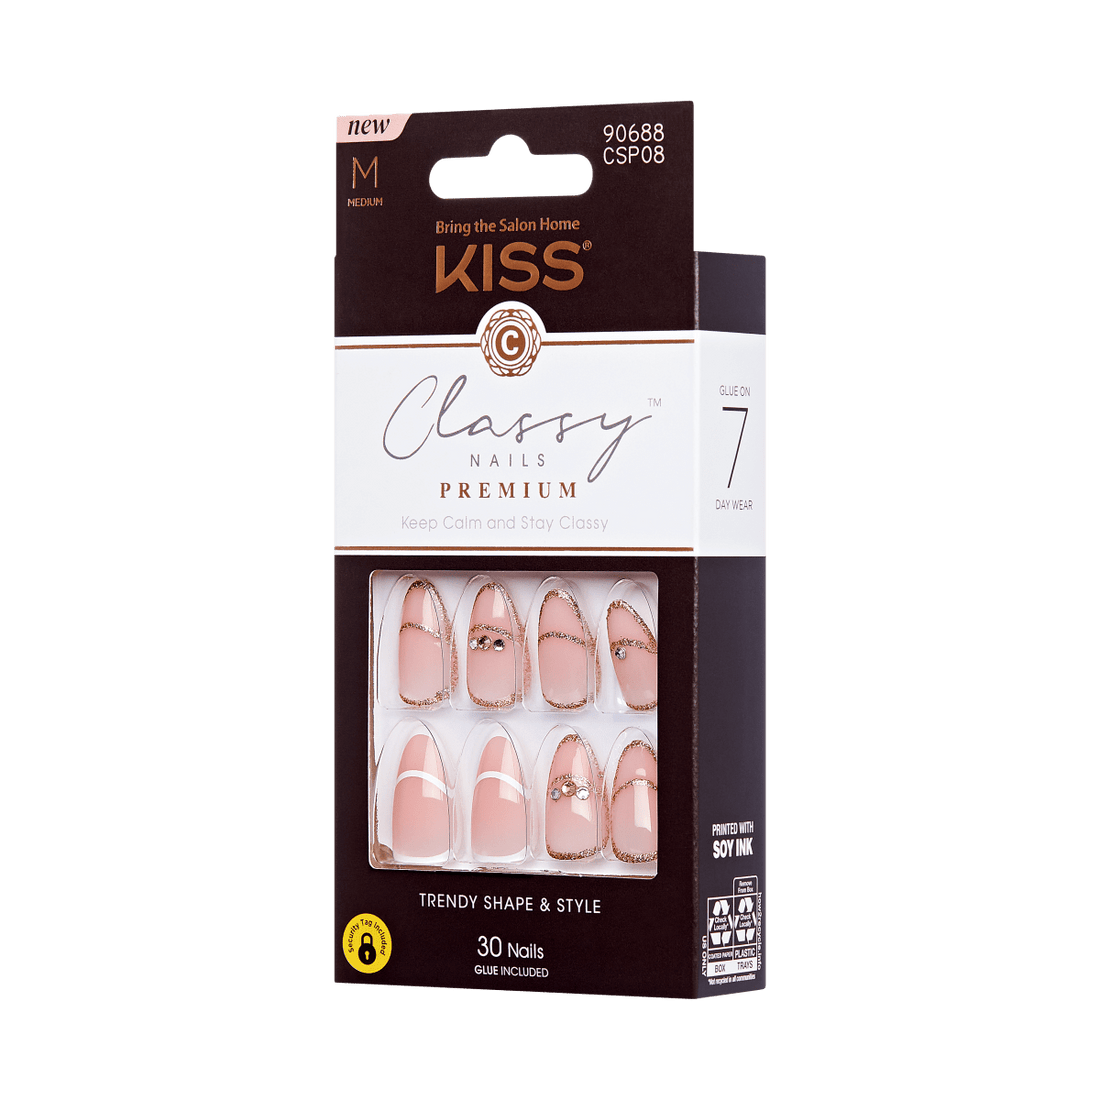 KISS Classy Nails, Press-On Nails, Over the Moon, Beige, Med Almond, 30ct